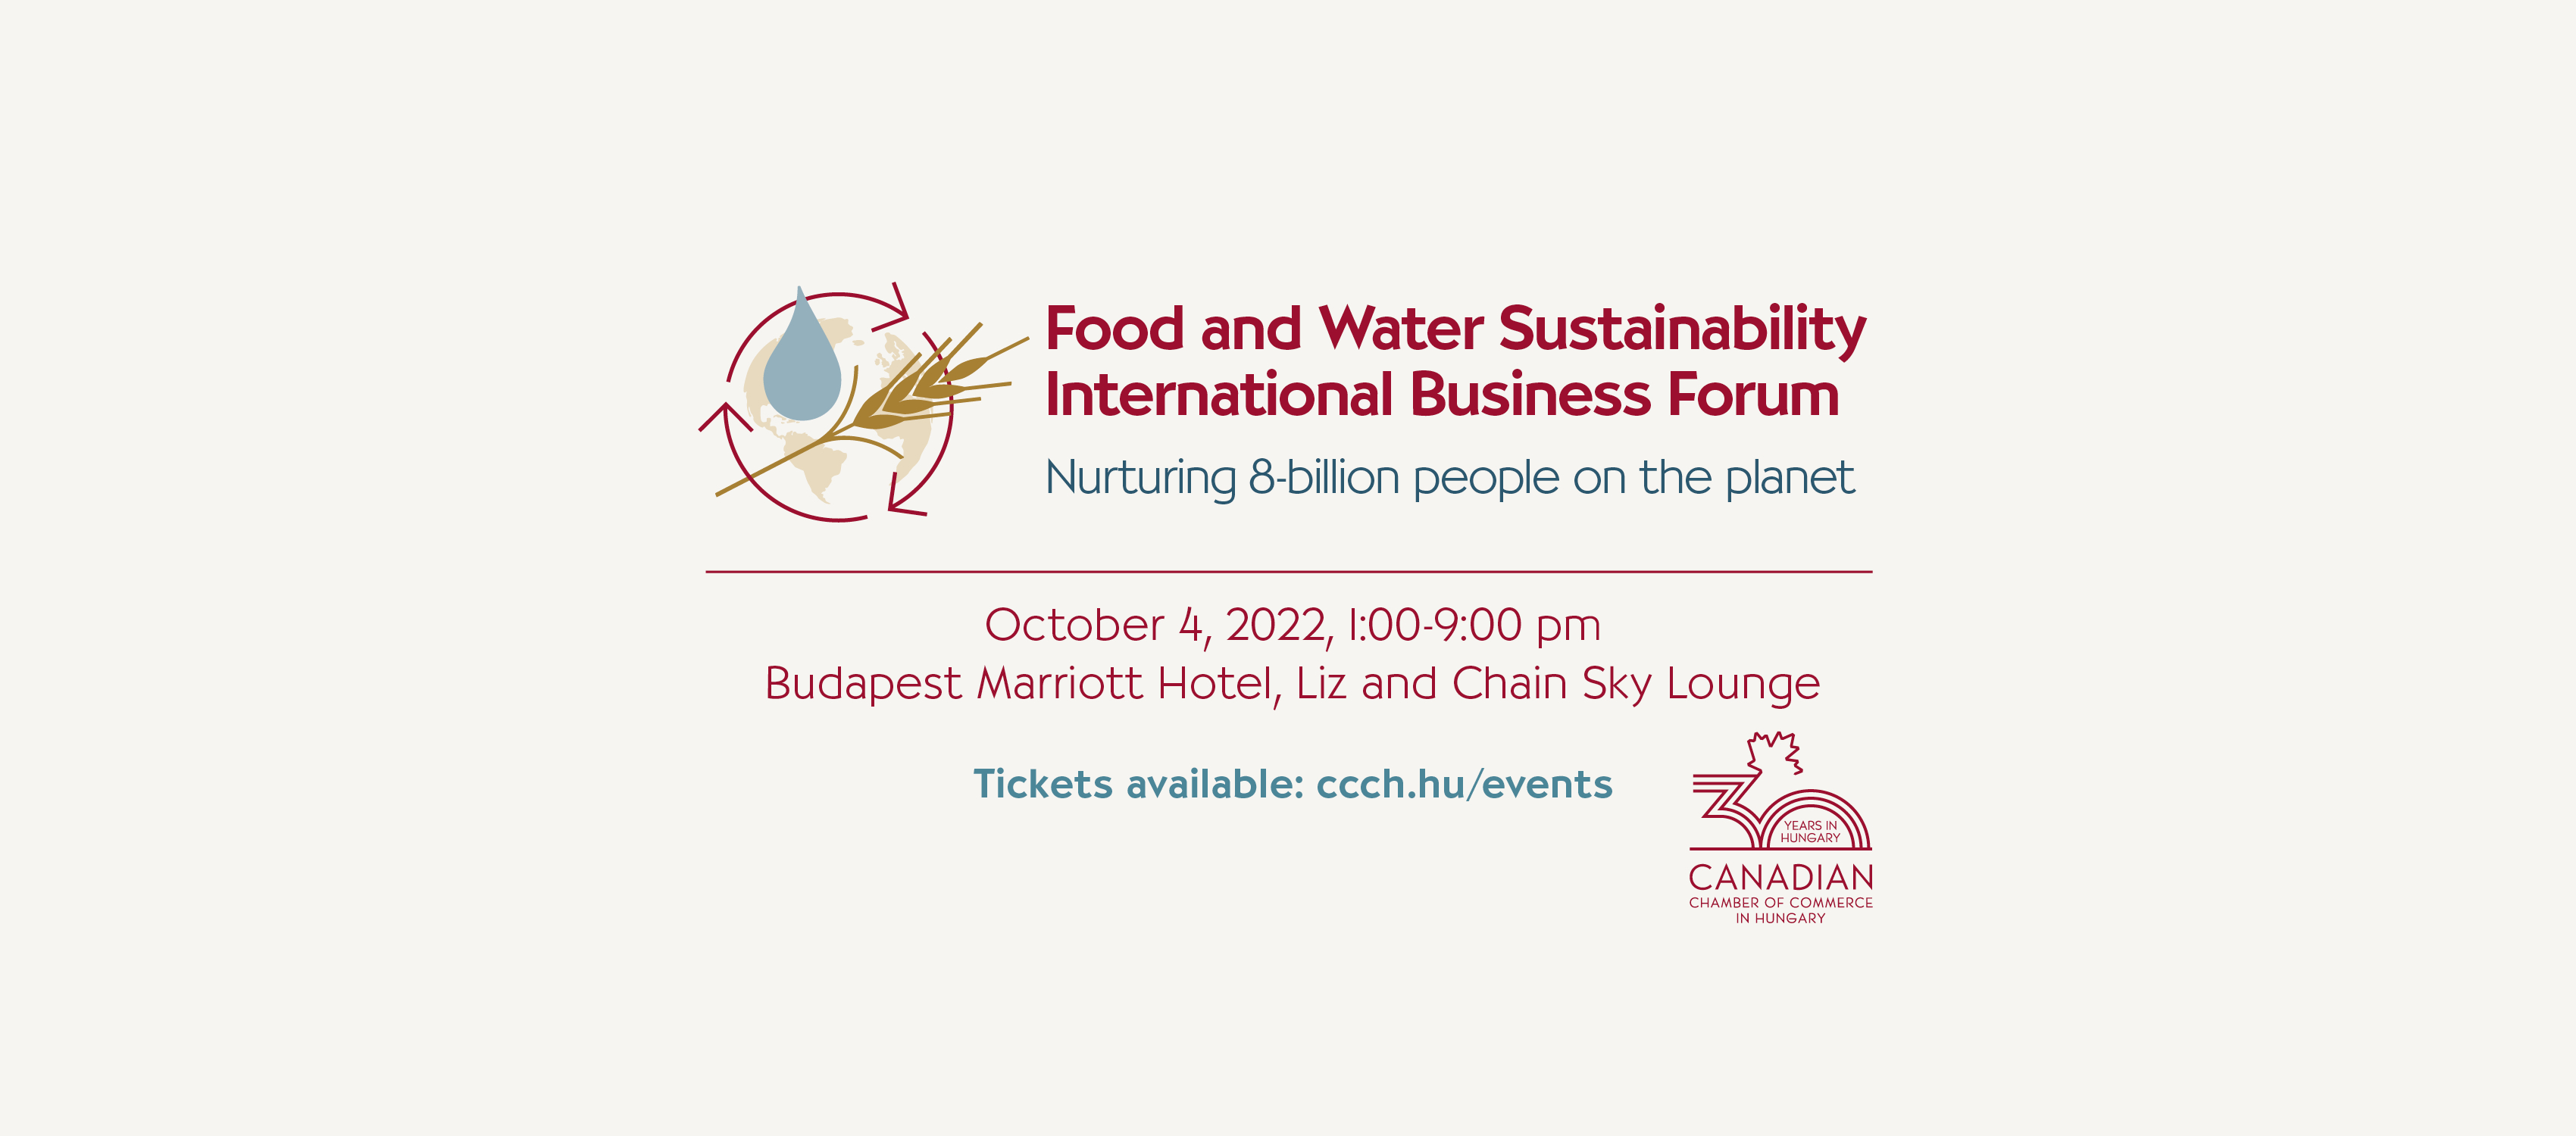 CCCH Hosting Food & Water Sustainability Forum in Budapest